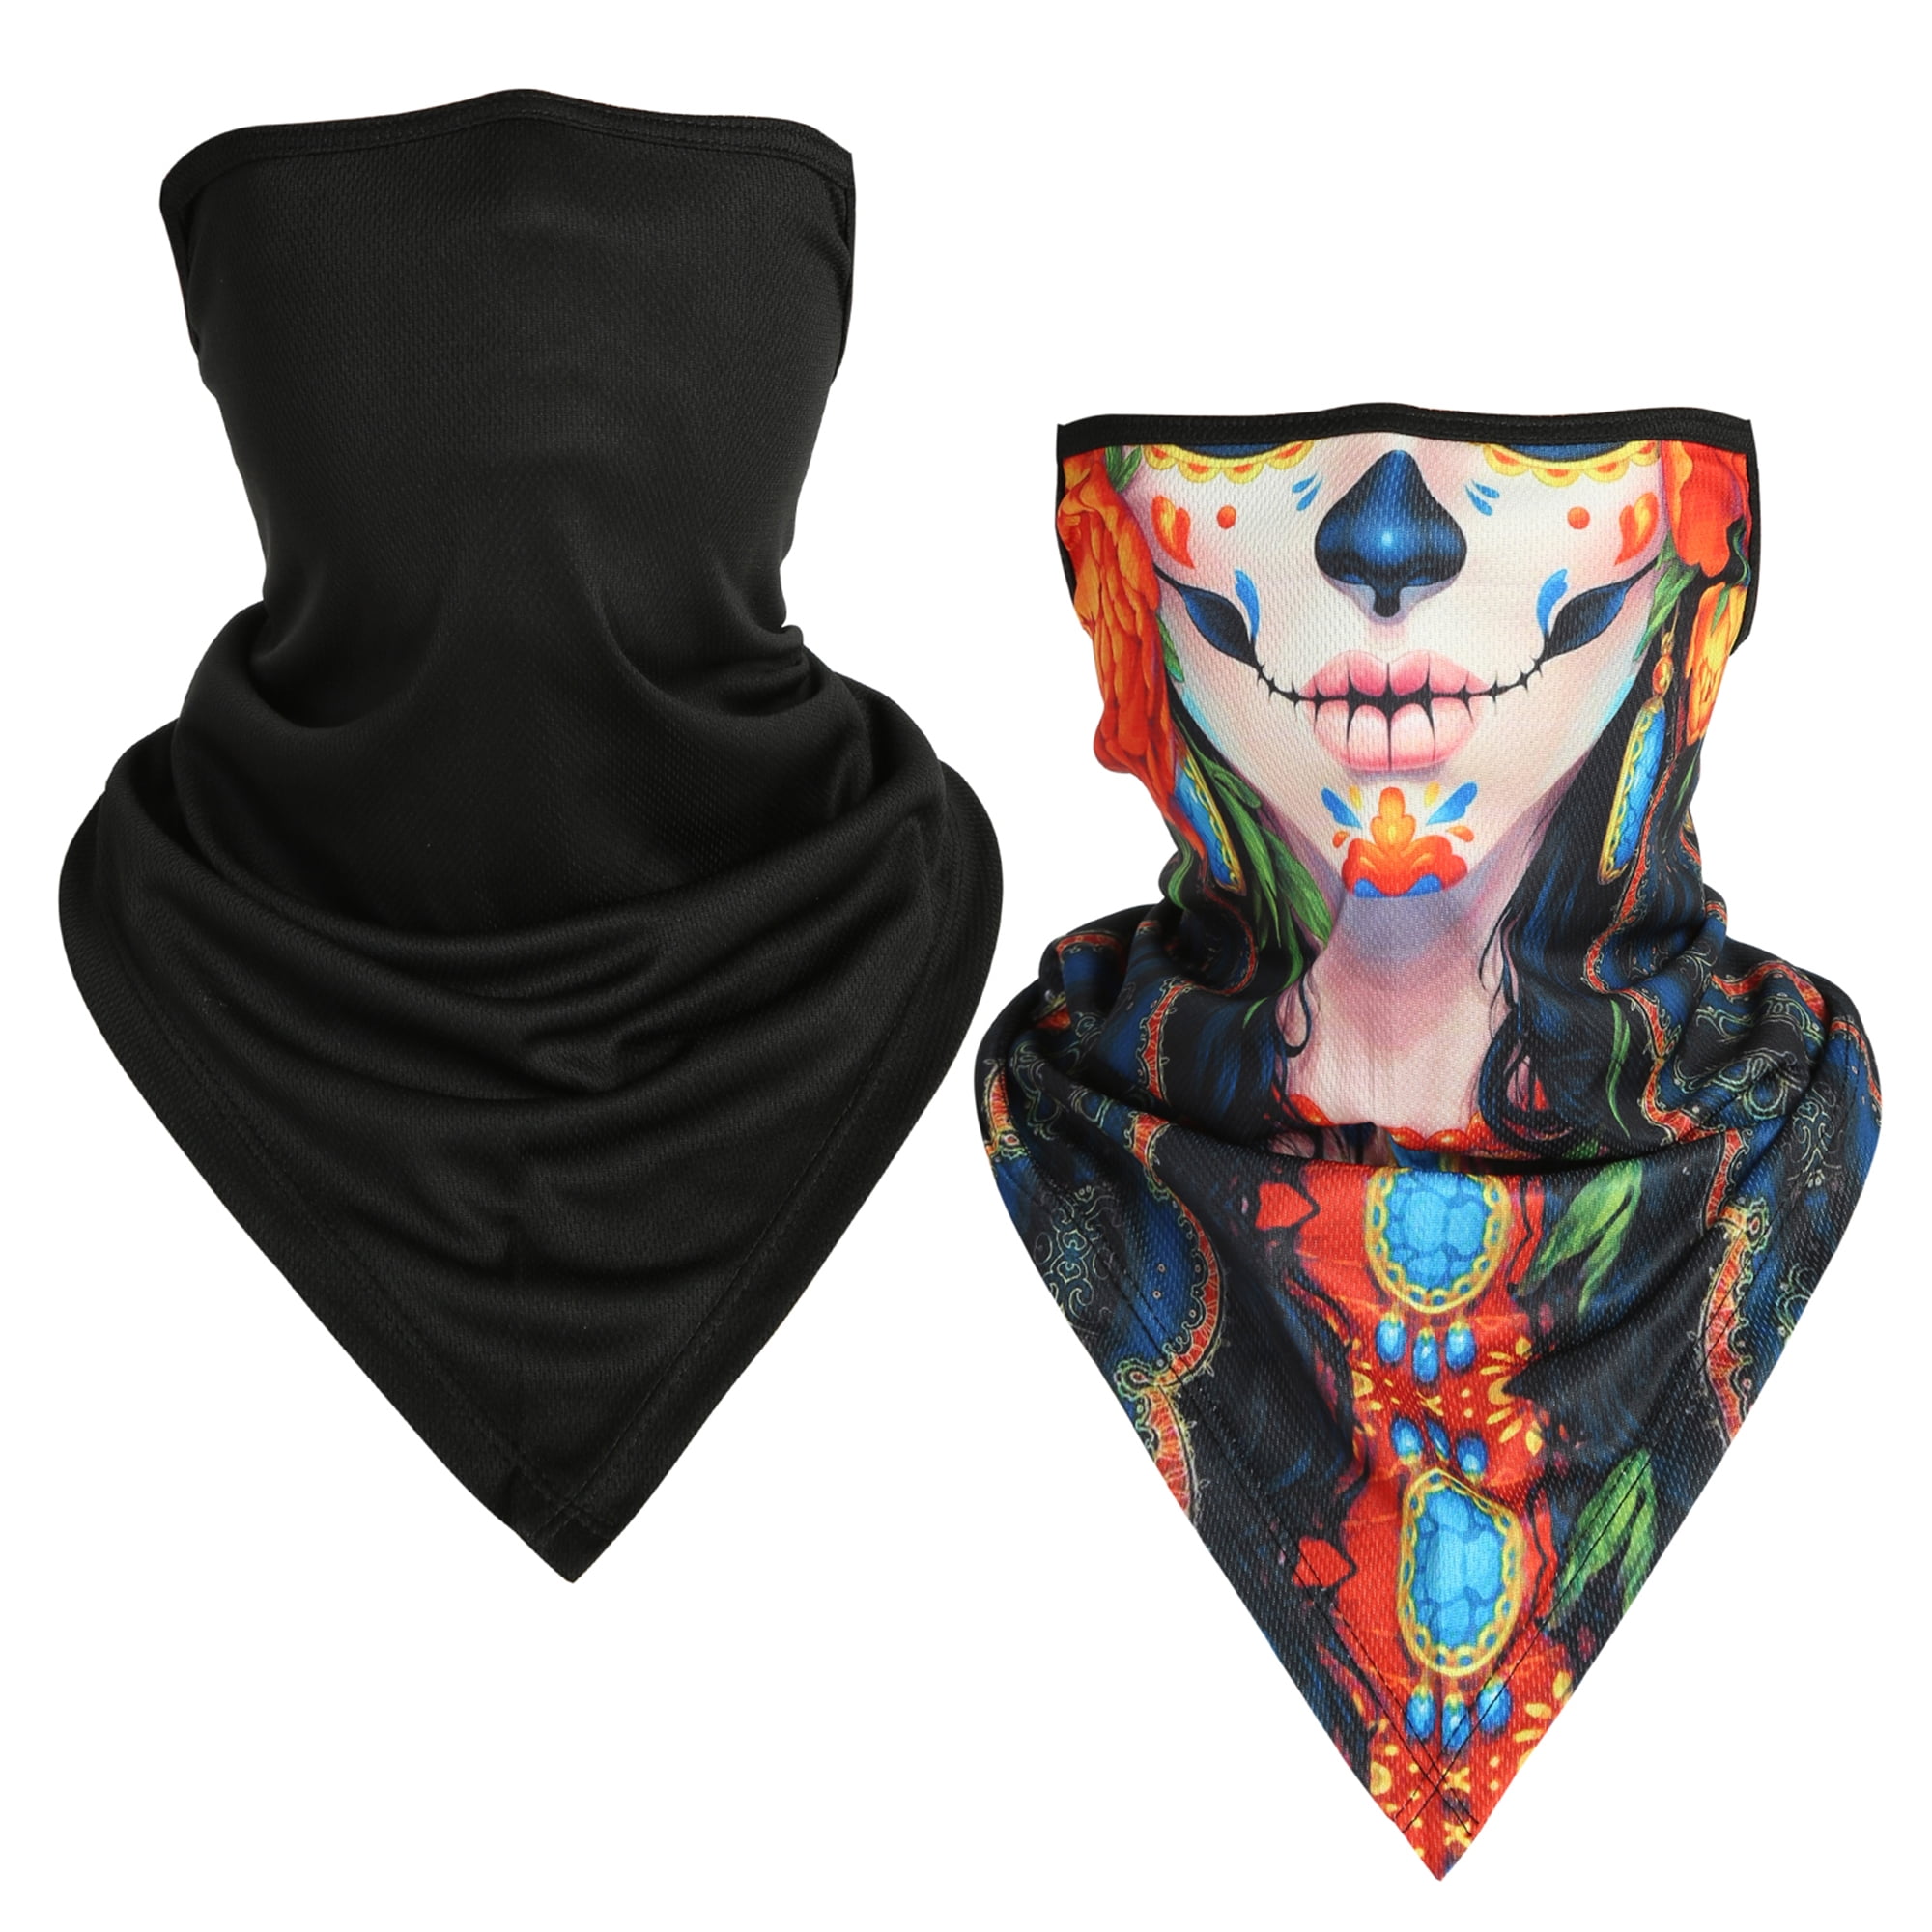 Details about   Cooling Neck Gaiter UV Protection Face Mask Windproof Scarf Breathable Balaclava 